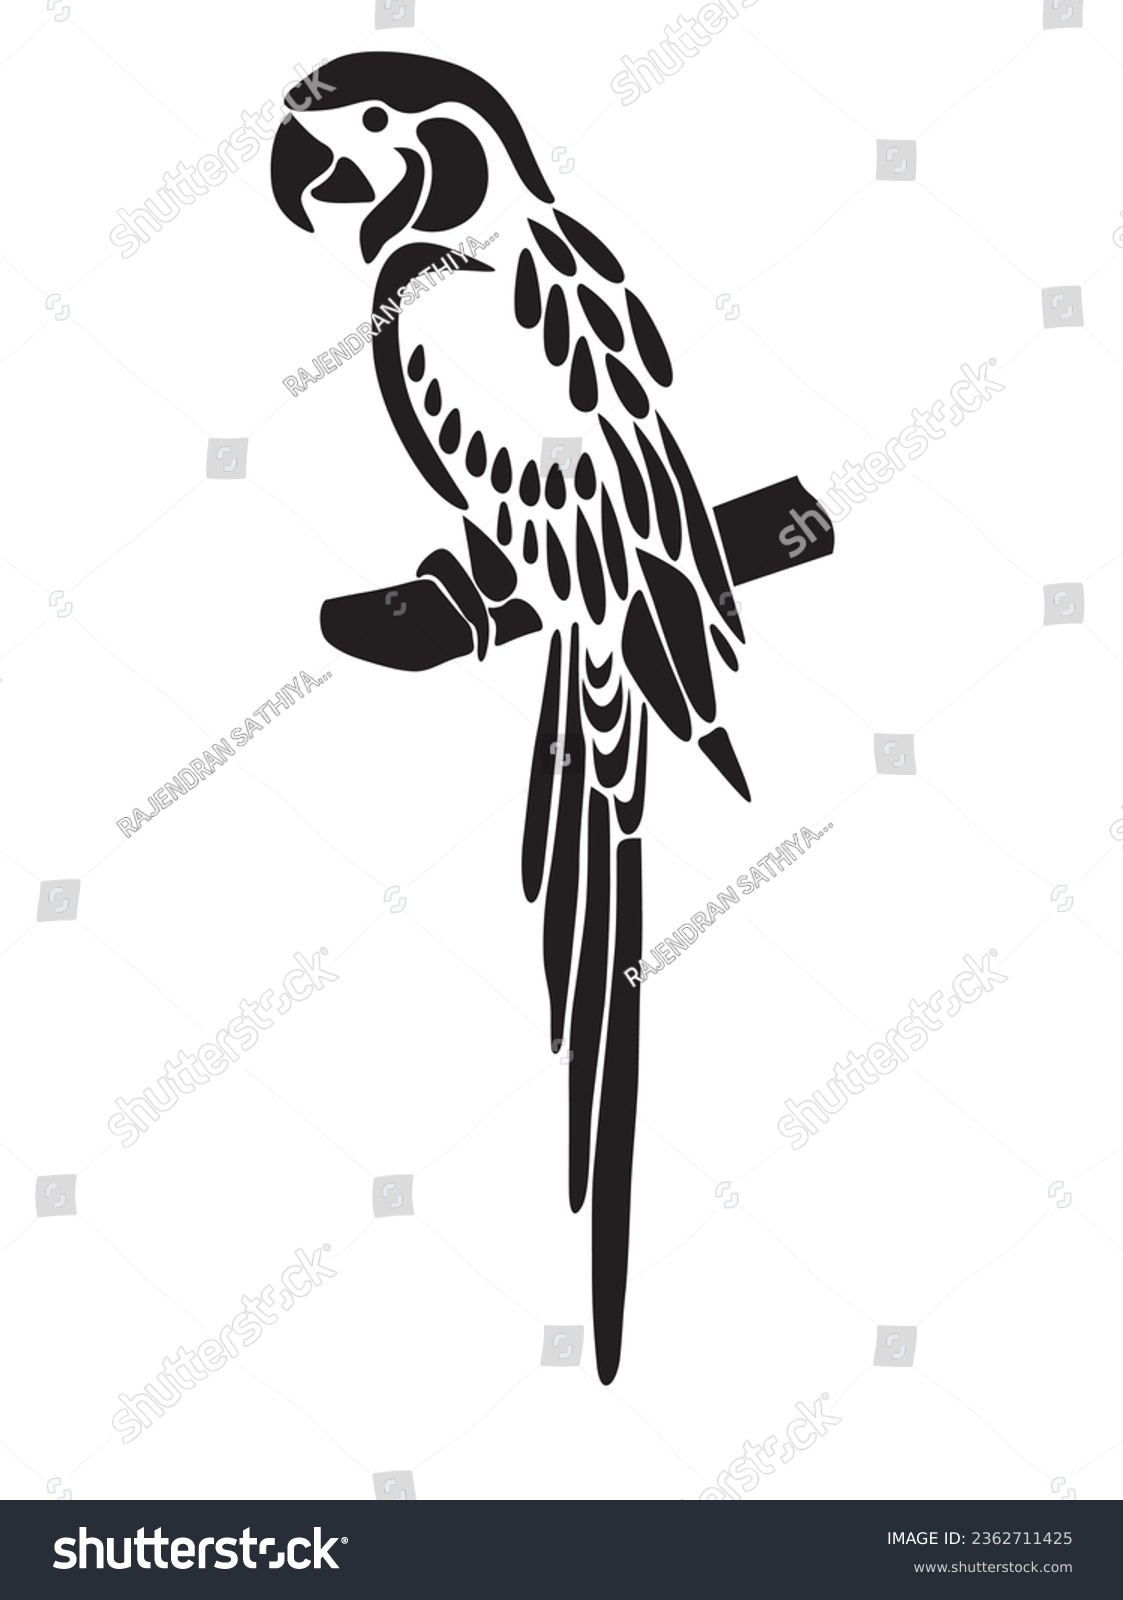 SVG of Parrot vector illustration. Isolated parrot on white background. svg